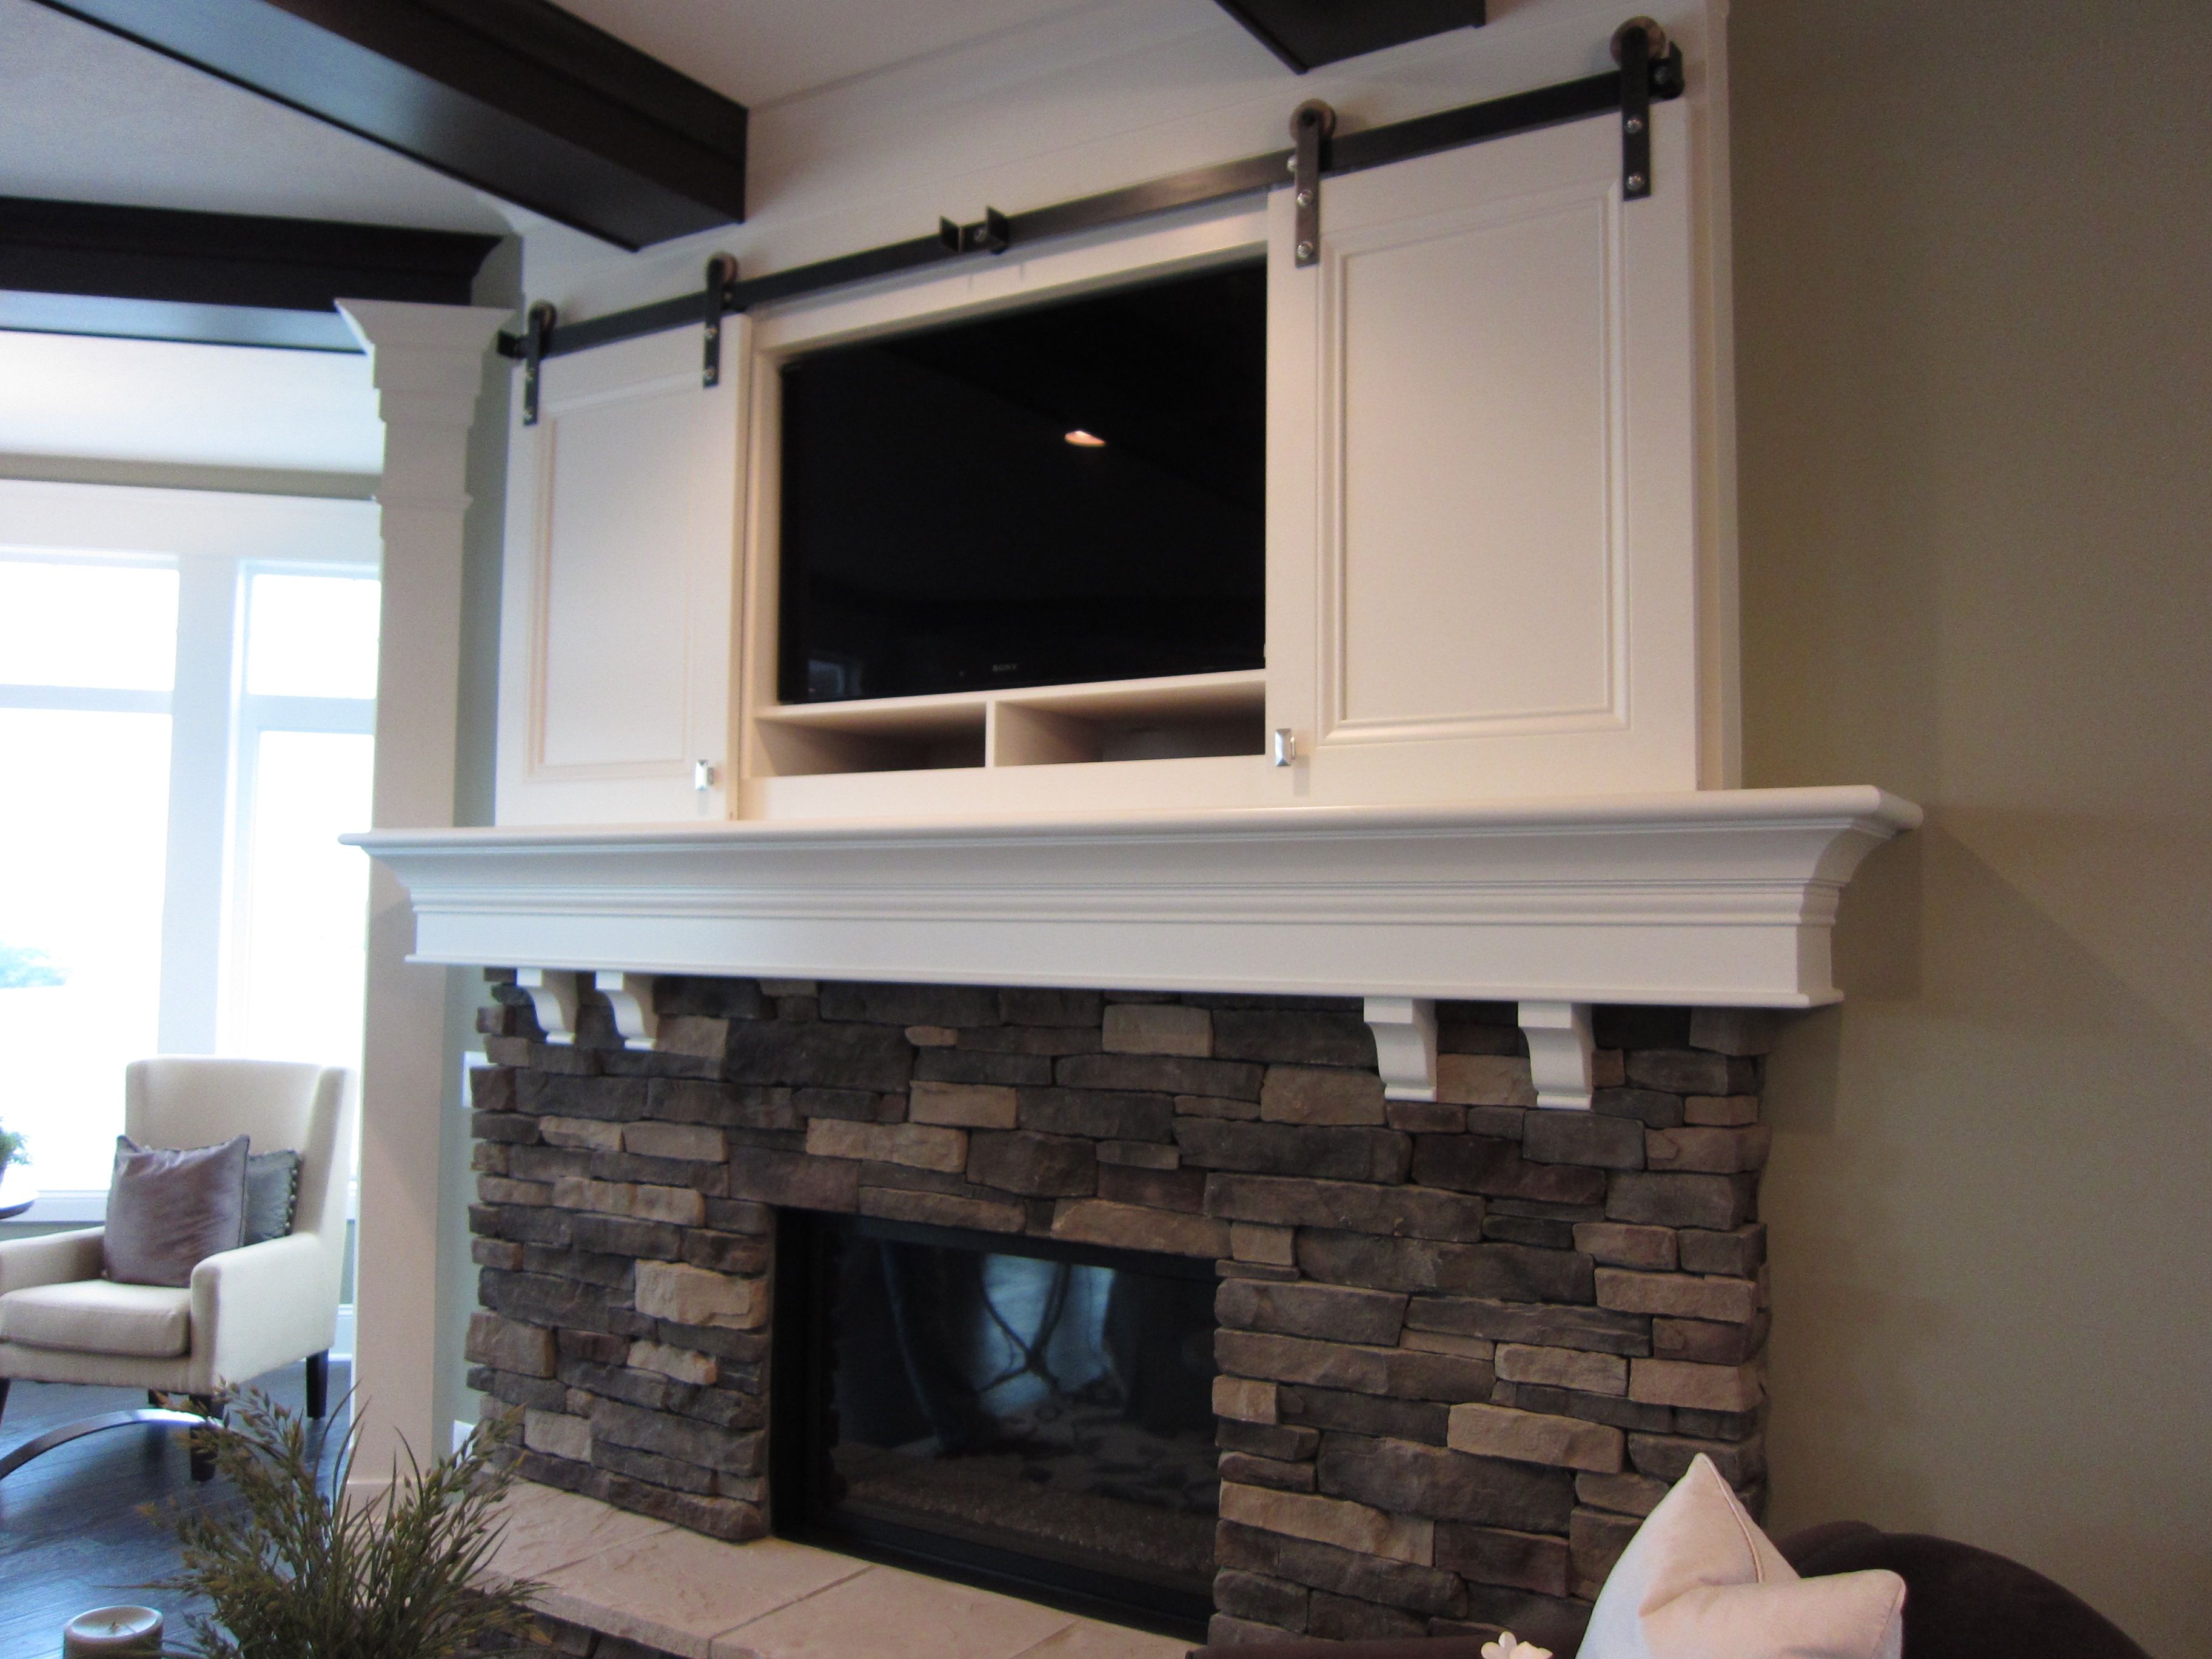 How to Clean the Inside Of A Fireplace Best Of Fireplace Tv Mantel Ideas Best 25 Tv Above Fireplace Ideas